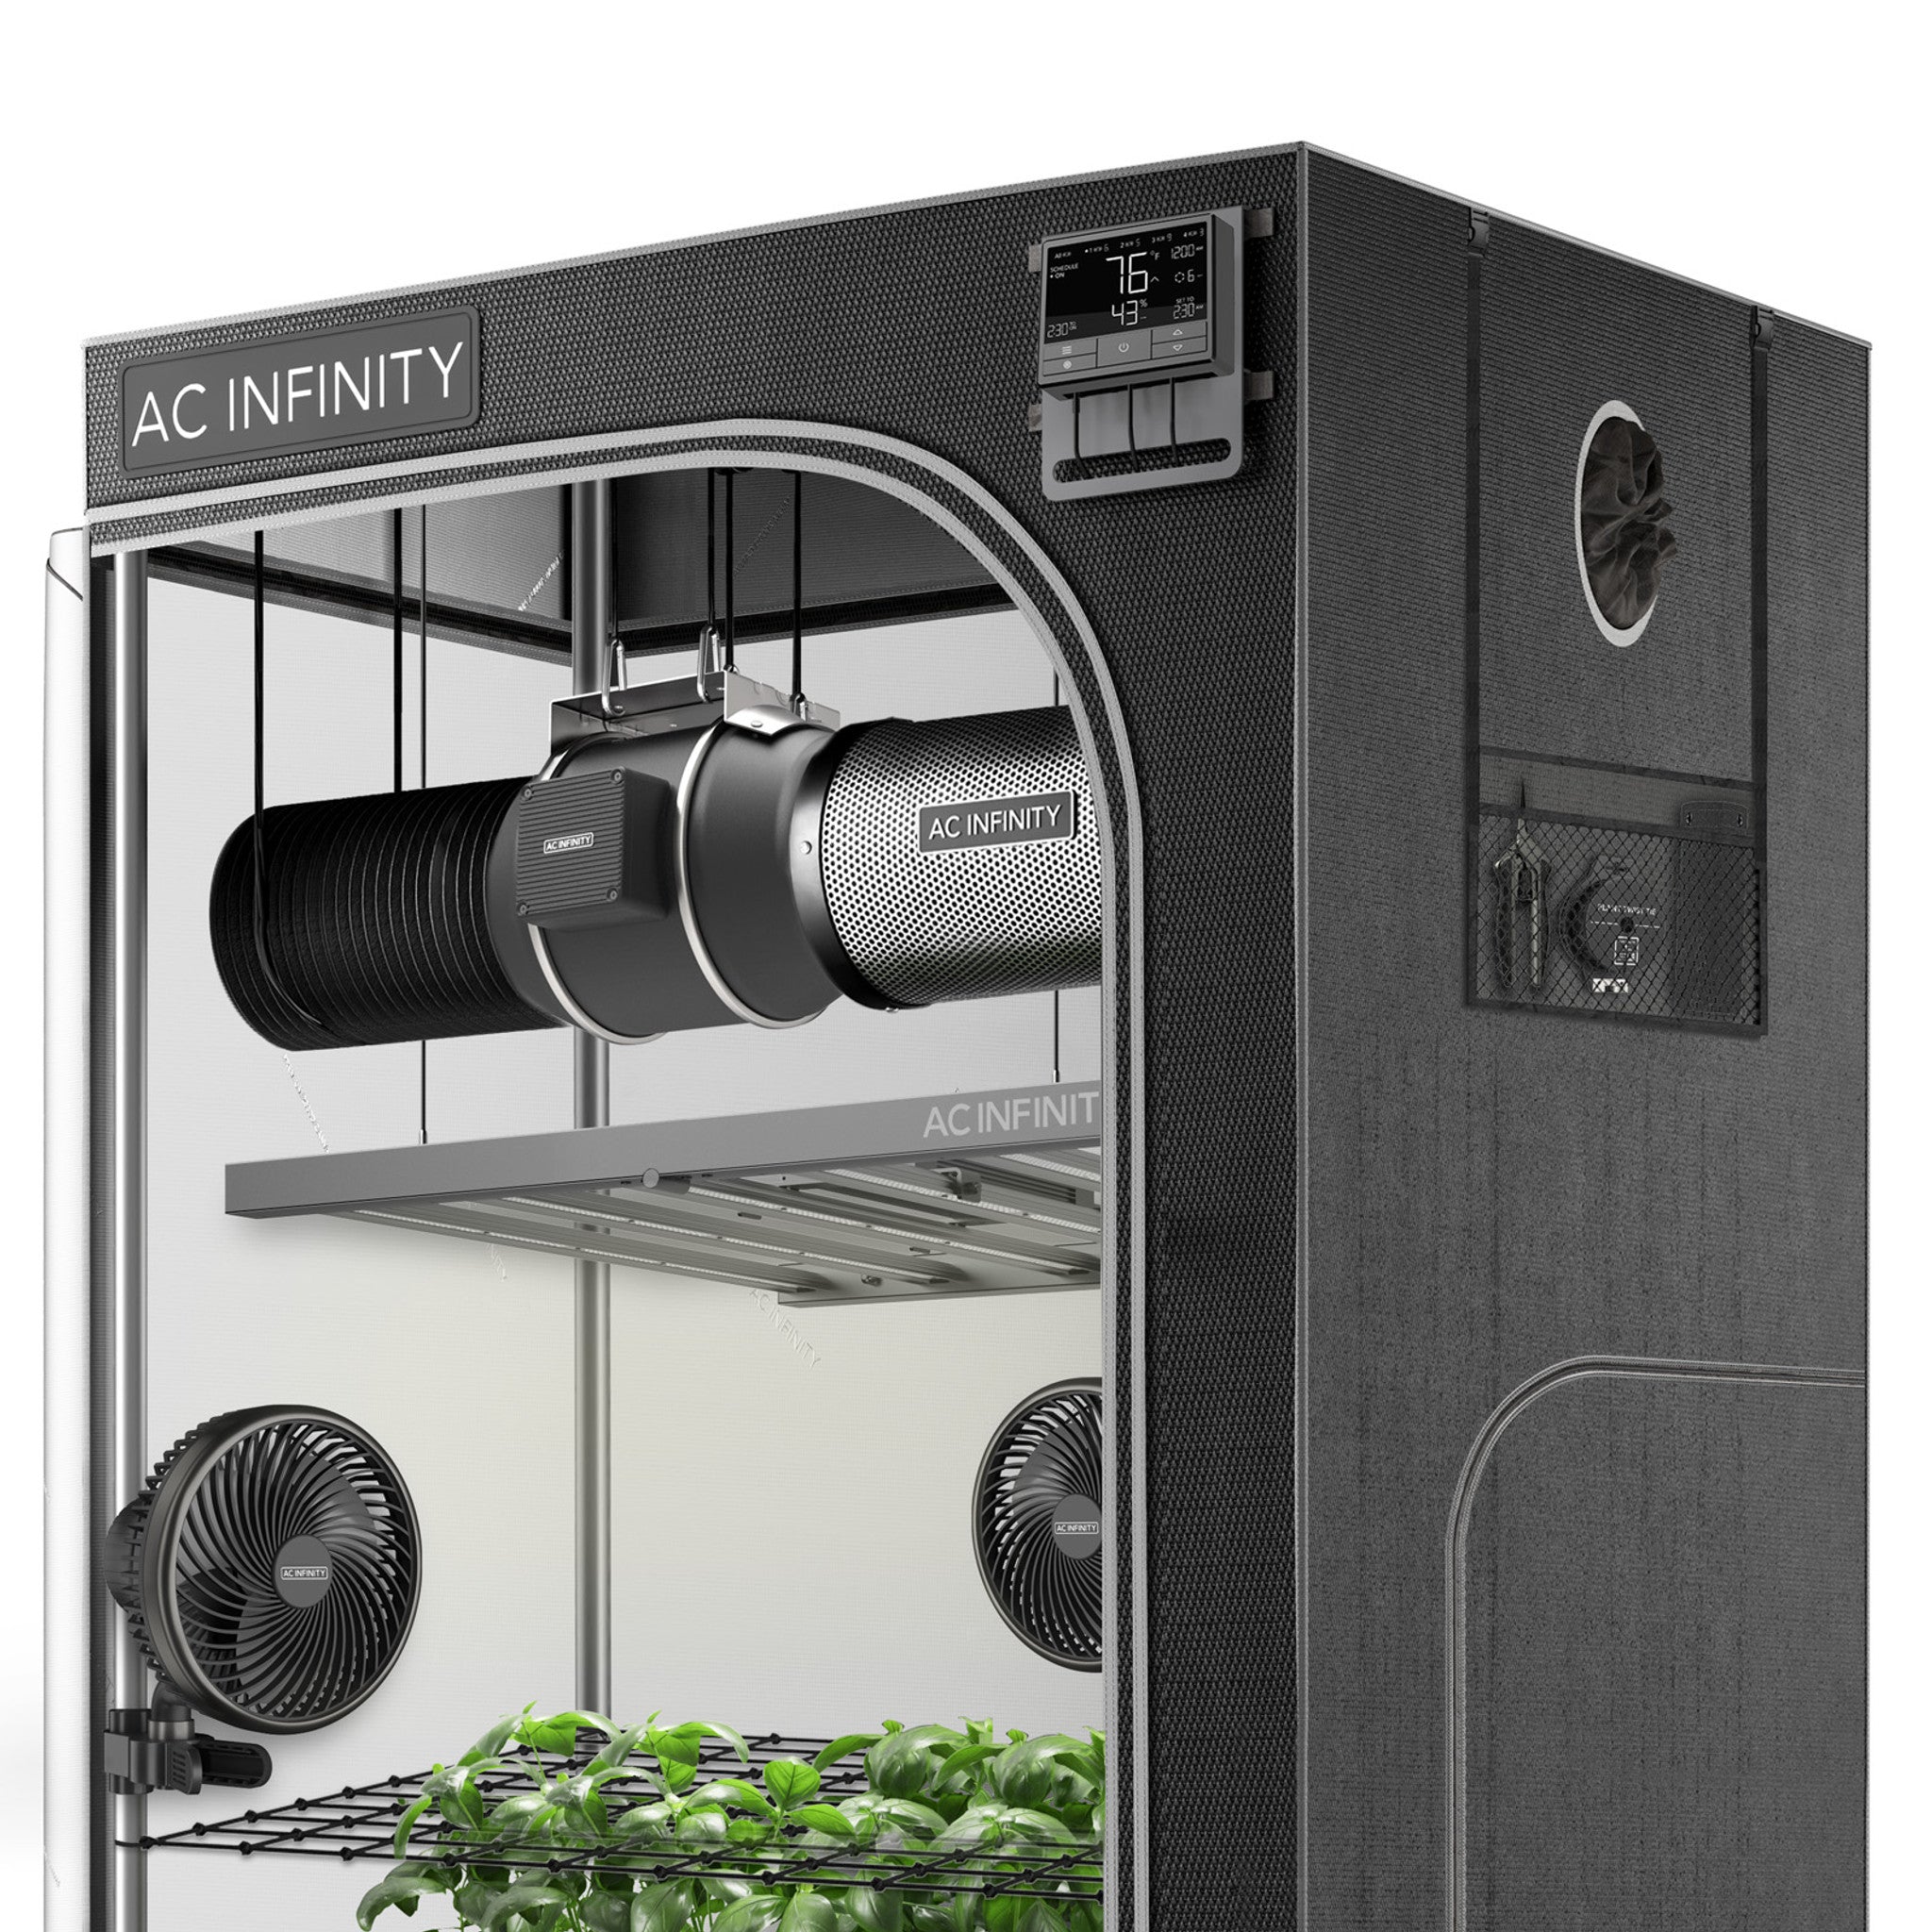 Product Image:ADVANCE GROW TENT SYSTEM PRO 4X4, 4-PLANT KIT, WIFI-INTEGRATED CONTROLS TO AUTOMATE VENTILATION, CIRCULATION, FULL SPECTRUM LM301H EVO LED GROW LIGHT